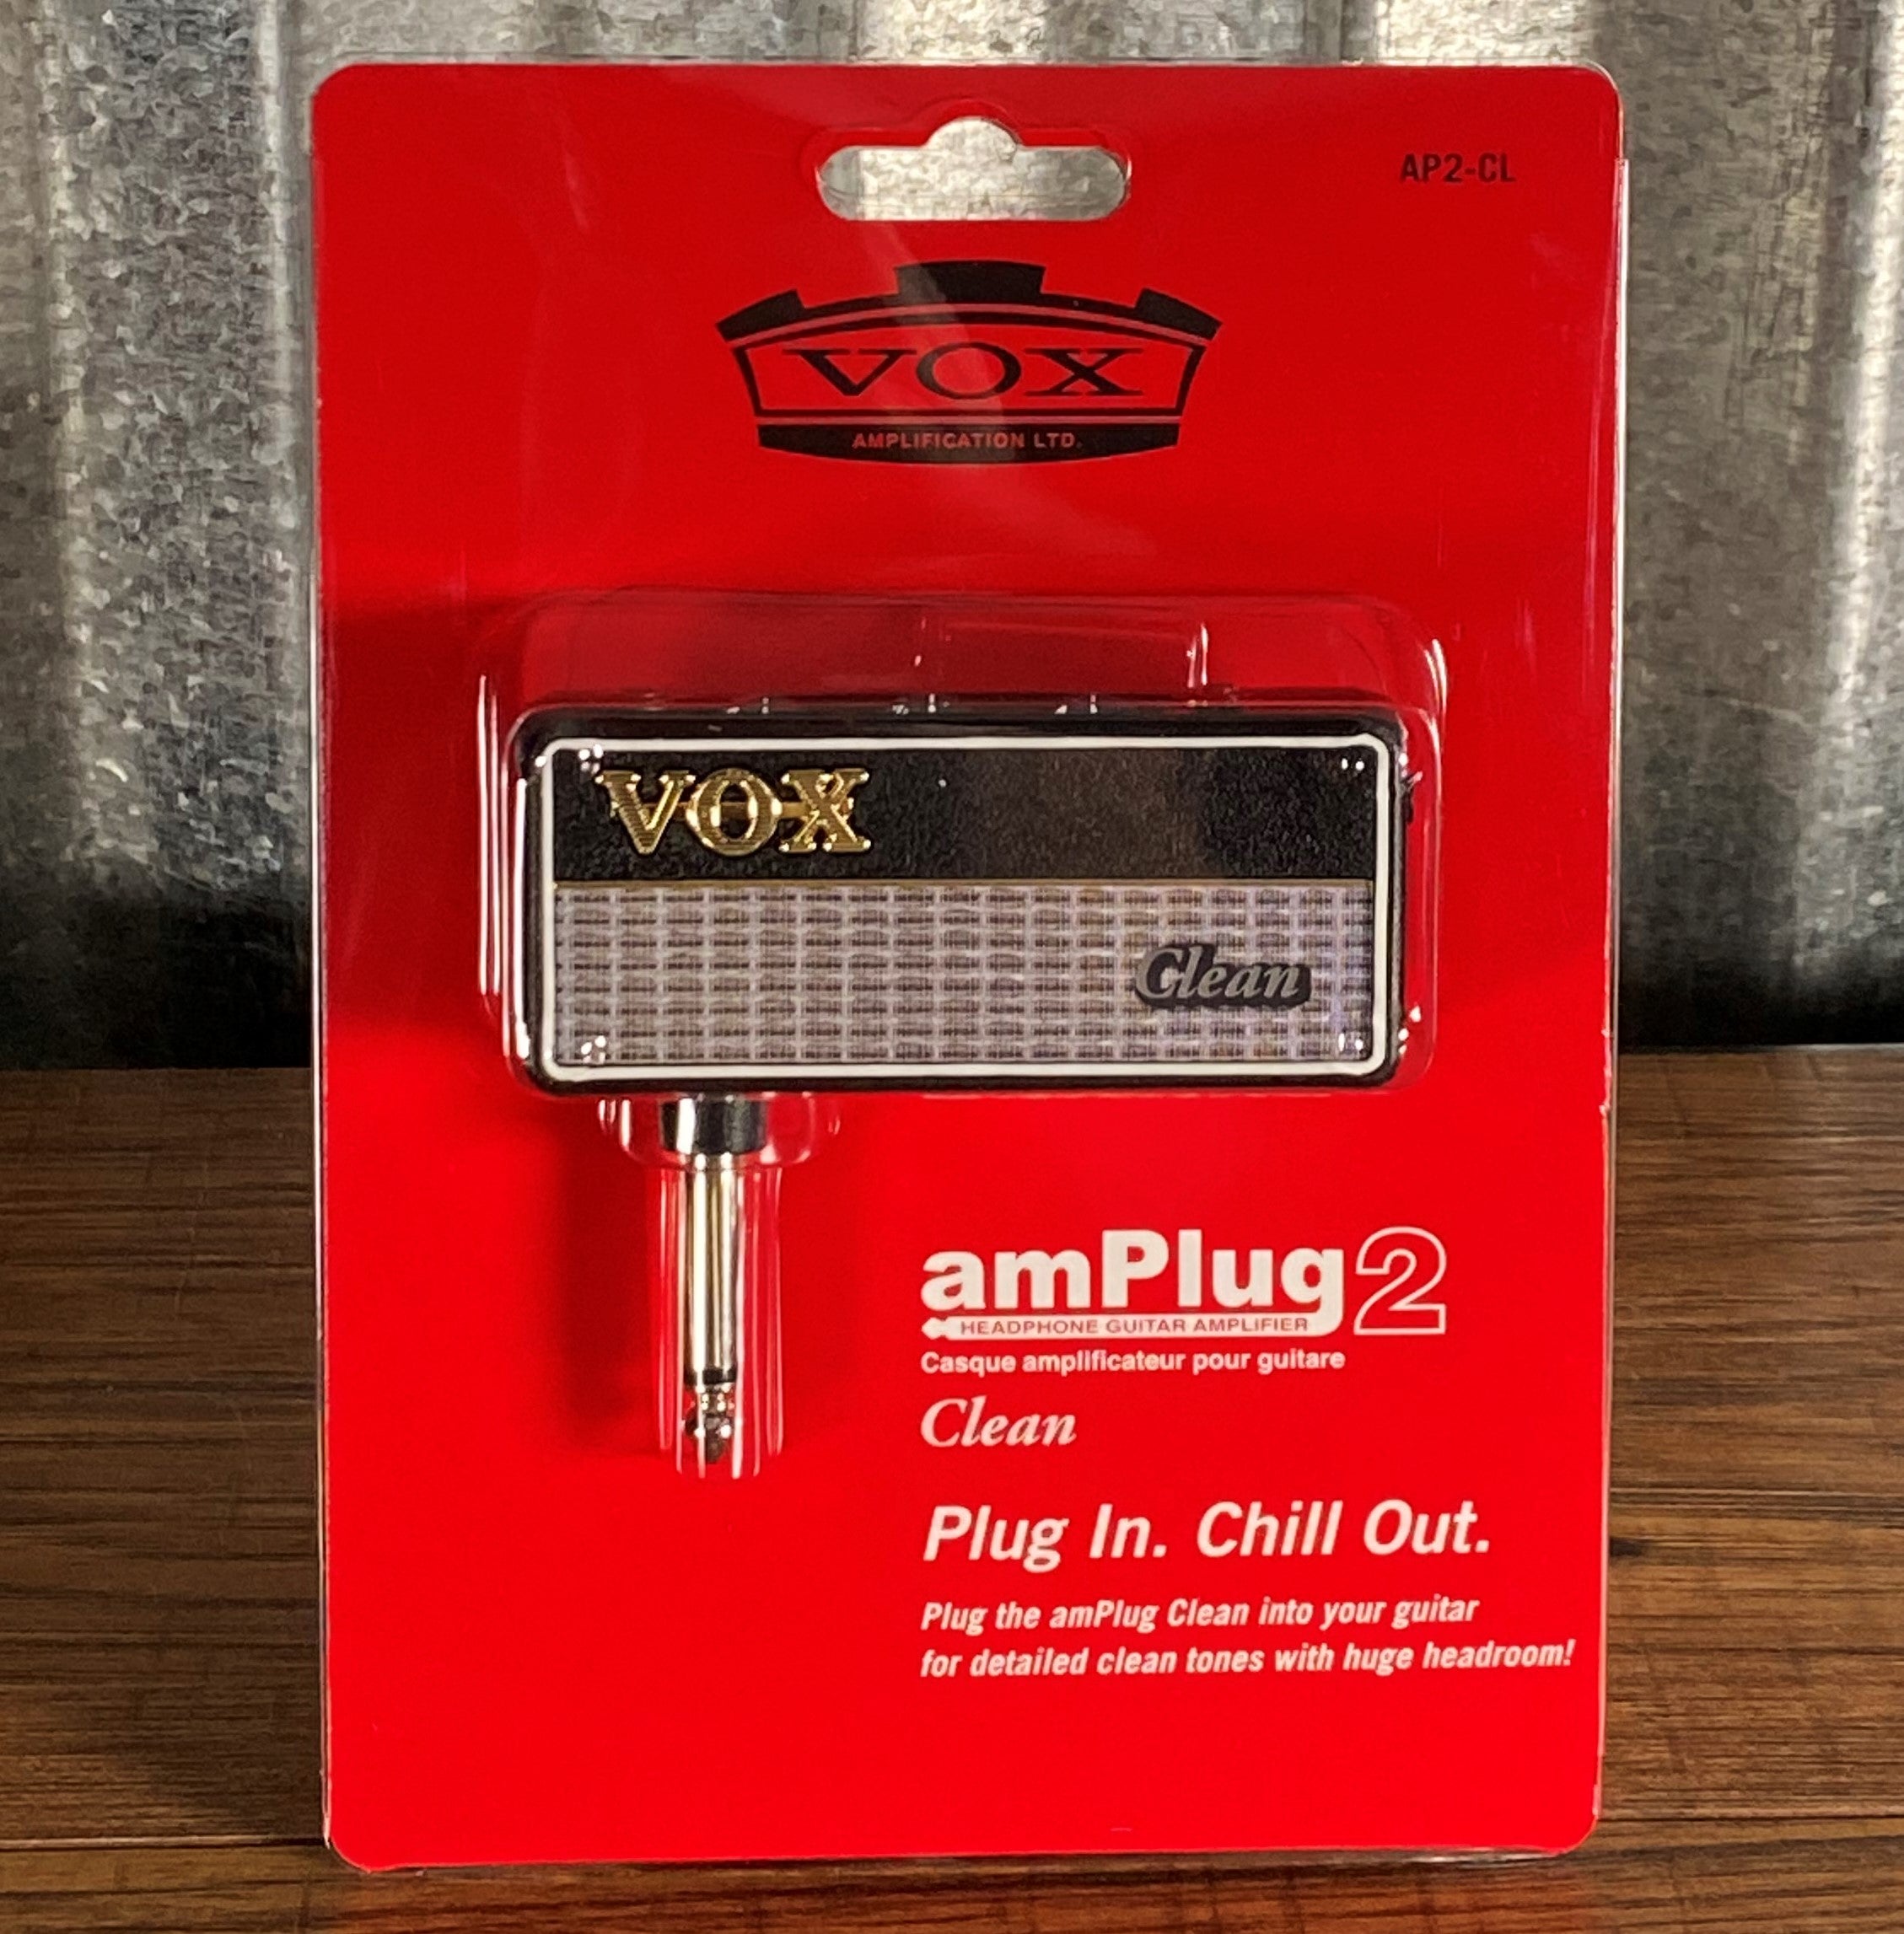 VOX amPlug Collection  Pocket amplifier for practice anytime